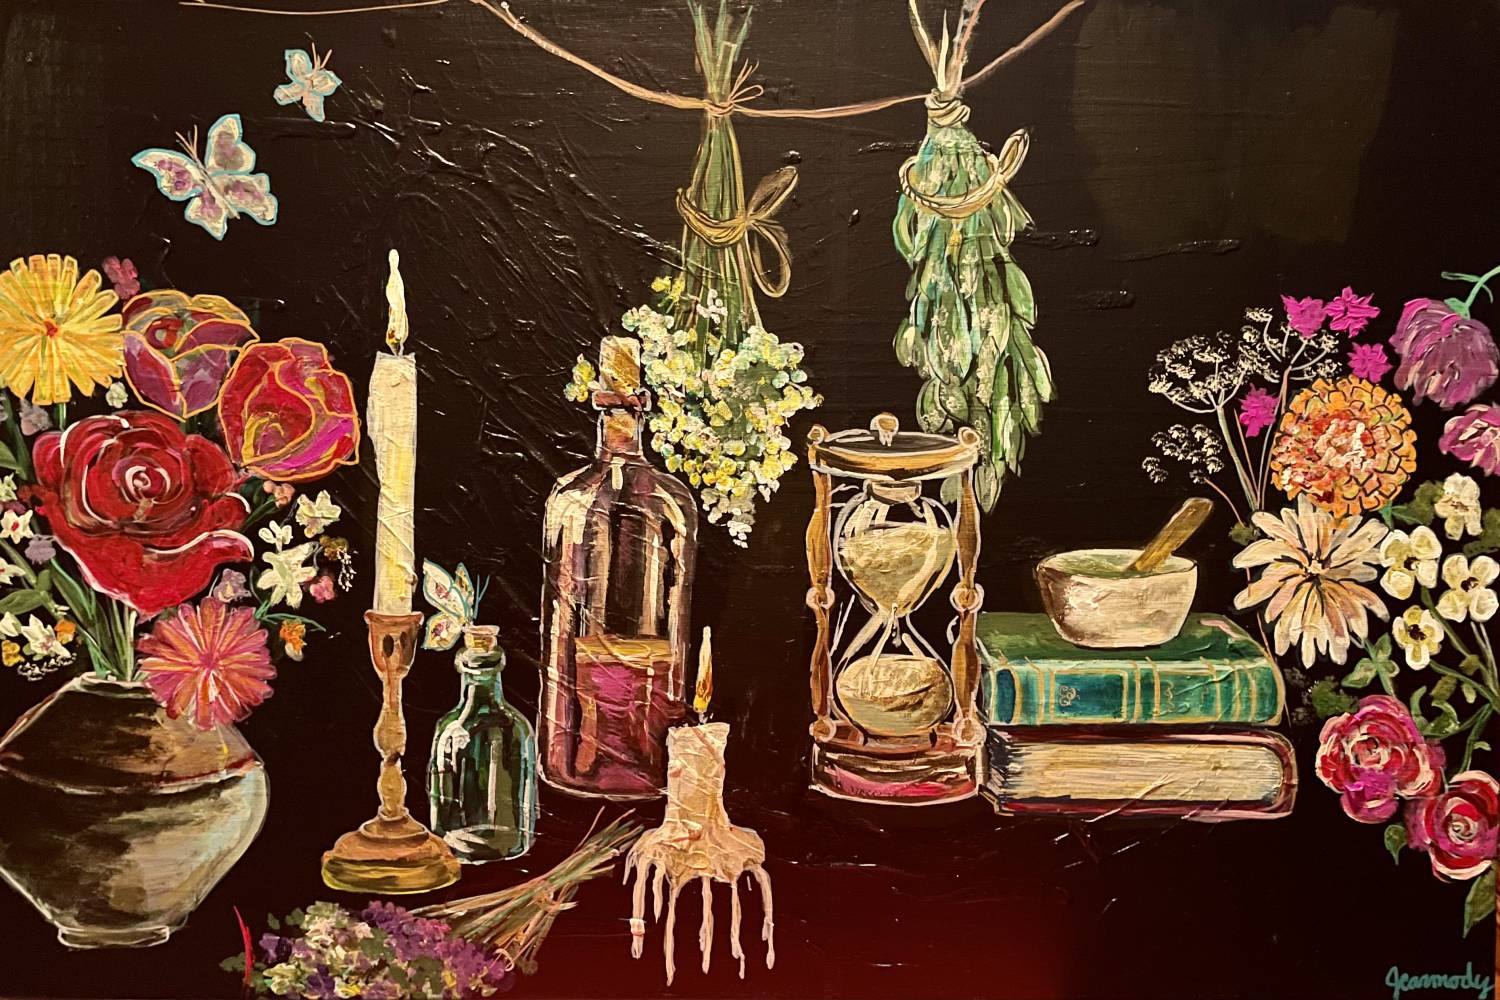 Artist Jacqueline Carmody's piece, "Sarah's Apothecary," which features flowers, candles, bottles, books and an hourglass on a table.